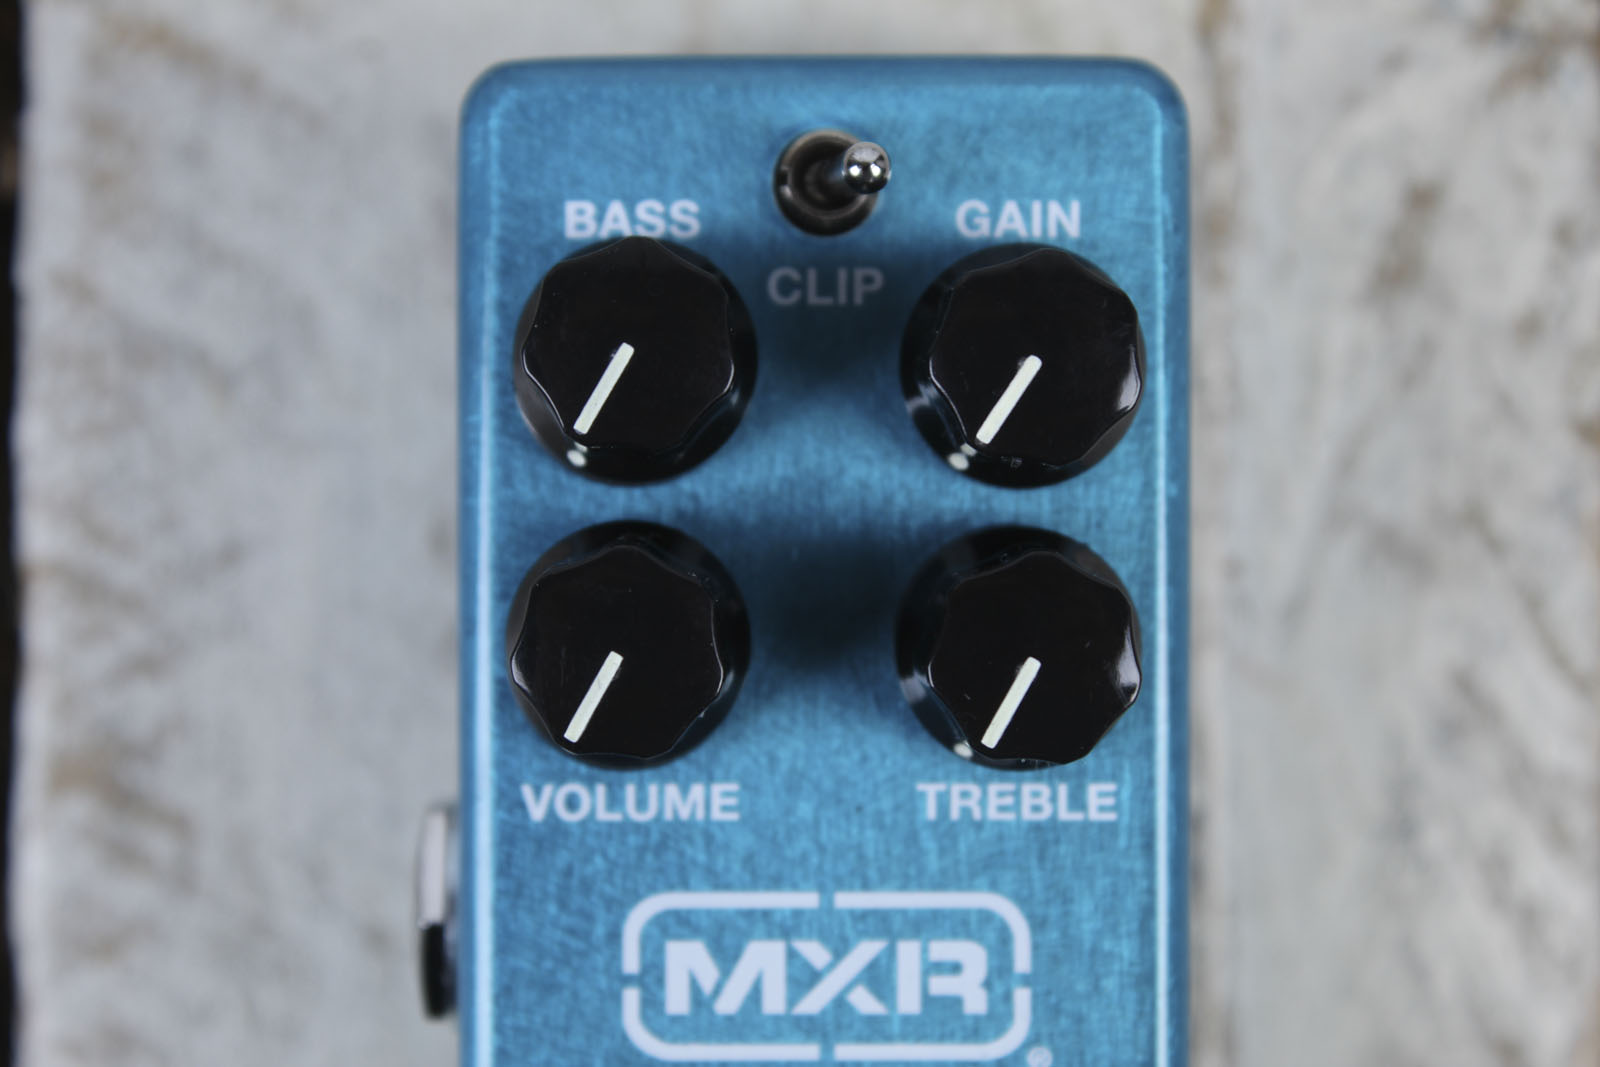 MXR Timmy Overdrive Effects Pedal Electric Guitar Overdrive